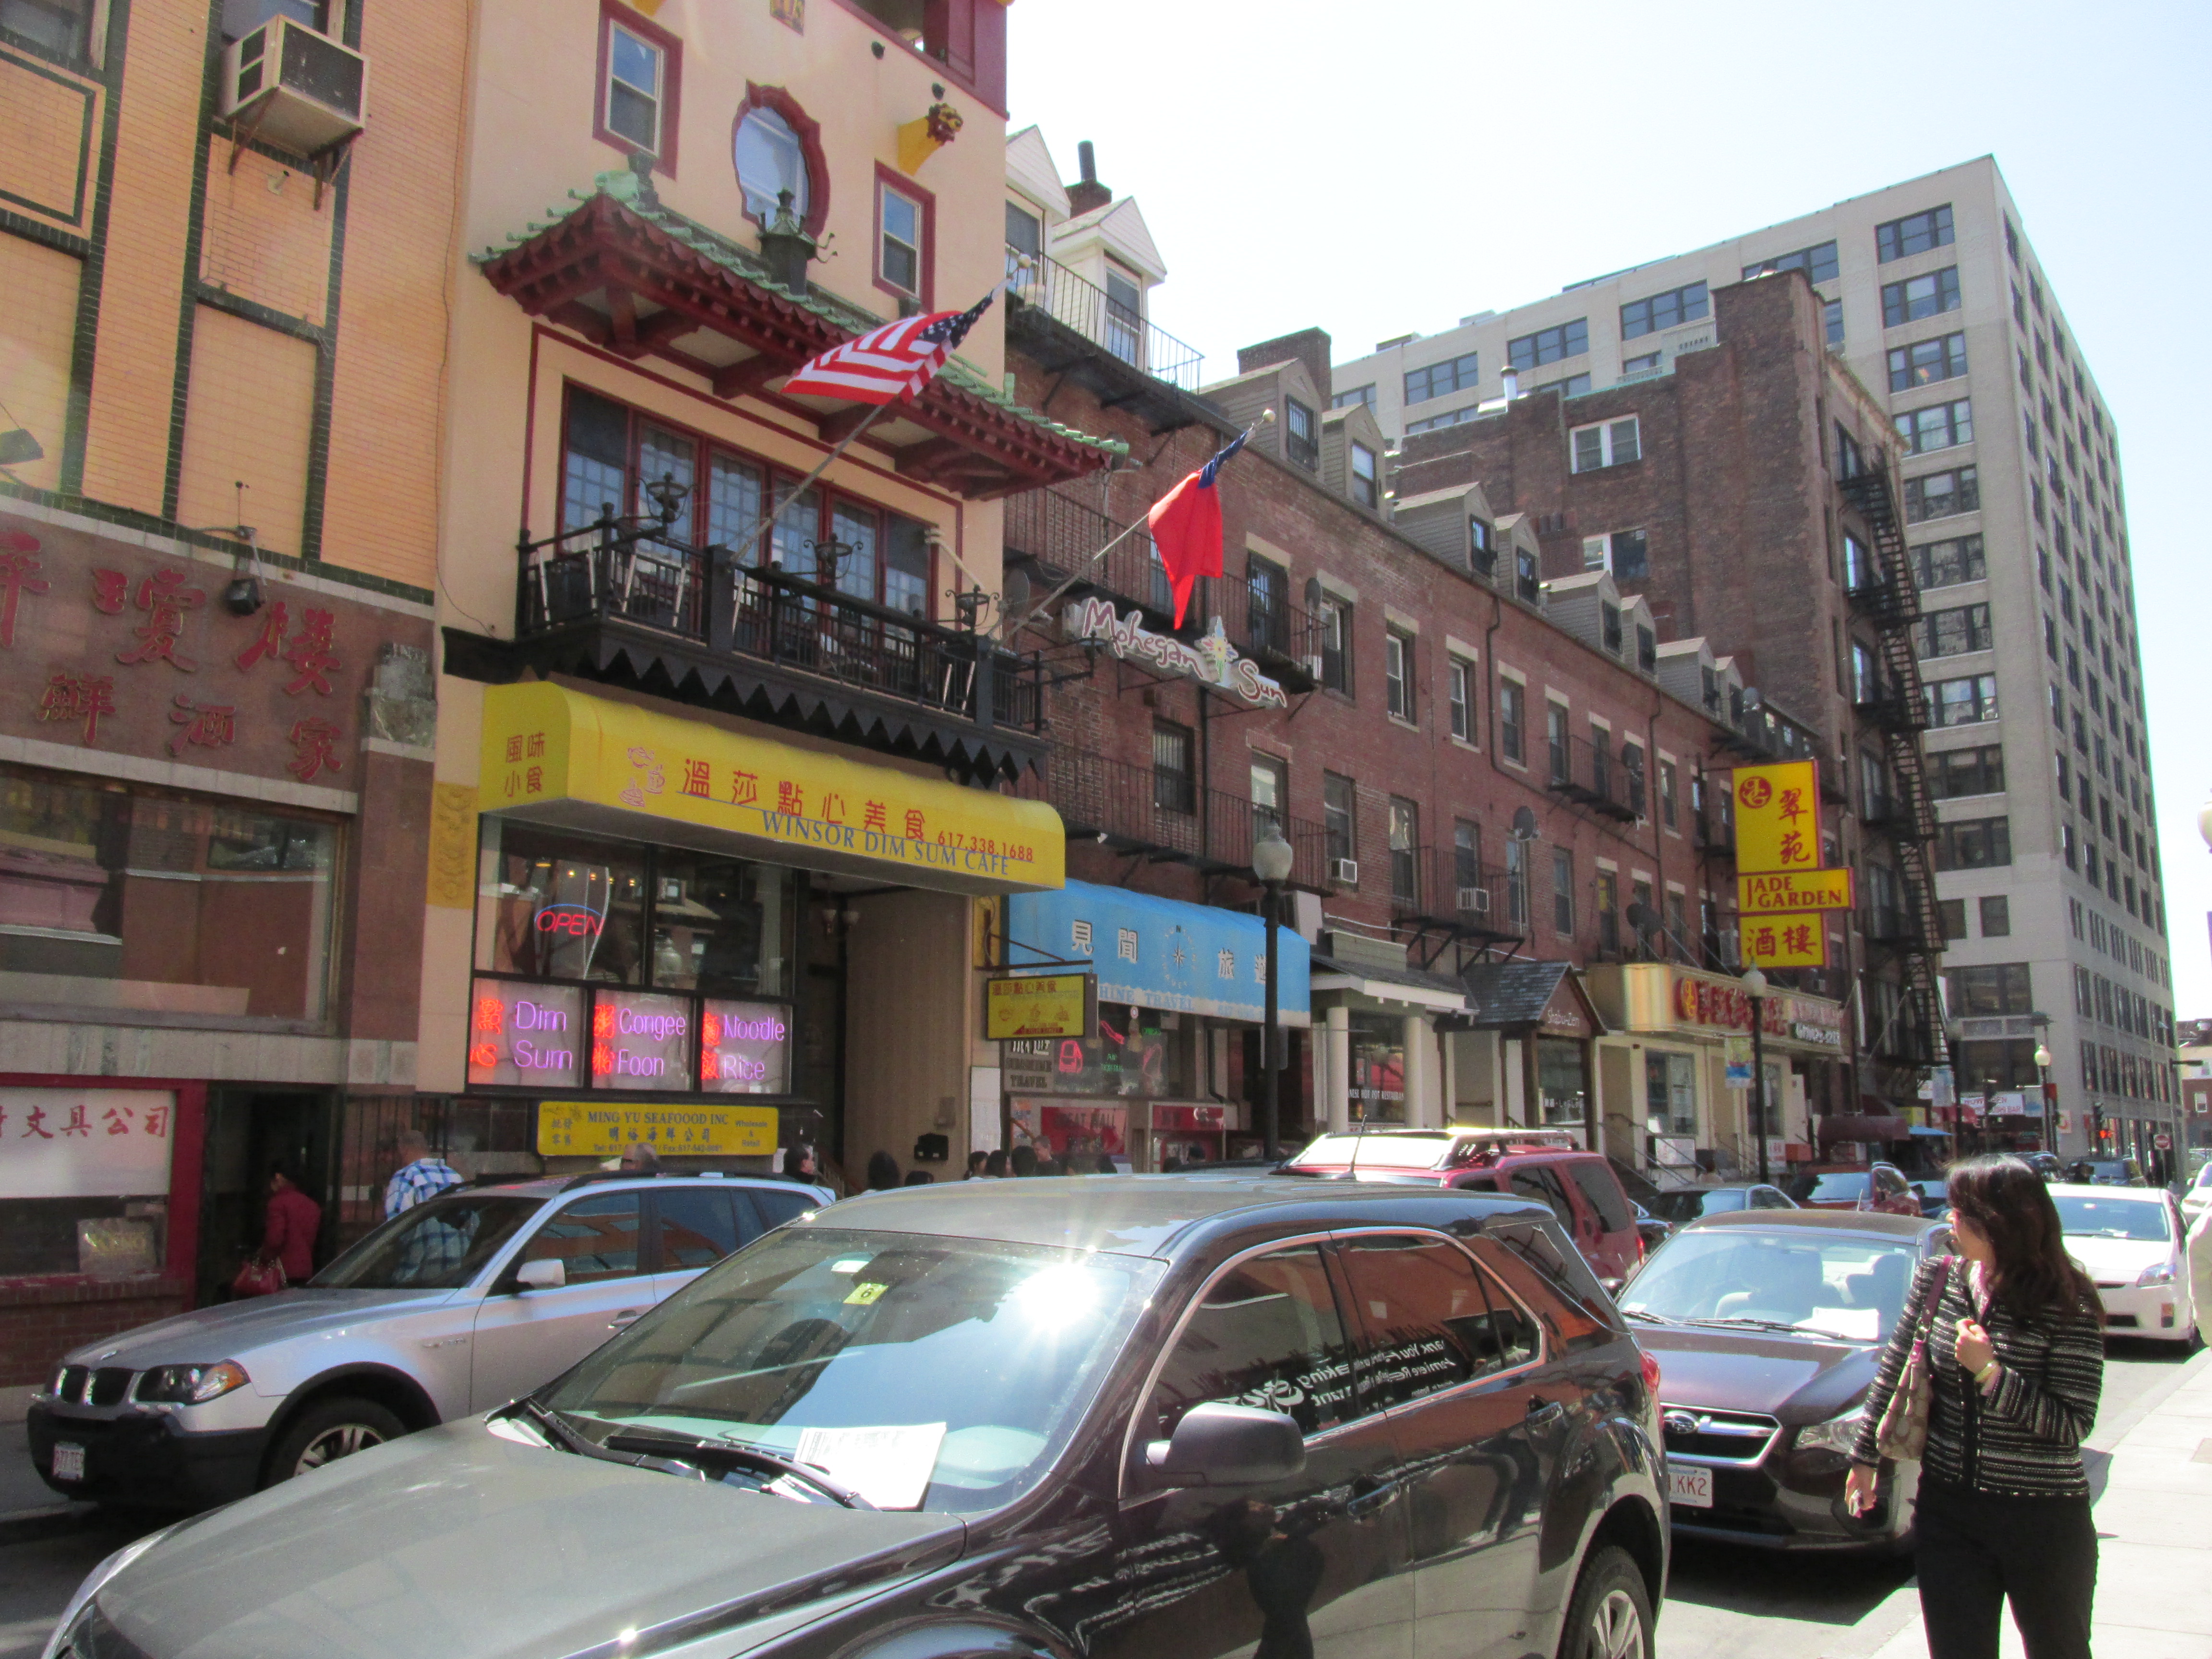 Boston's Chinatown was awesome and lively.